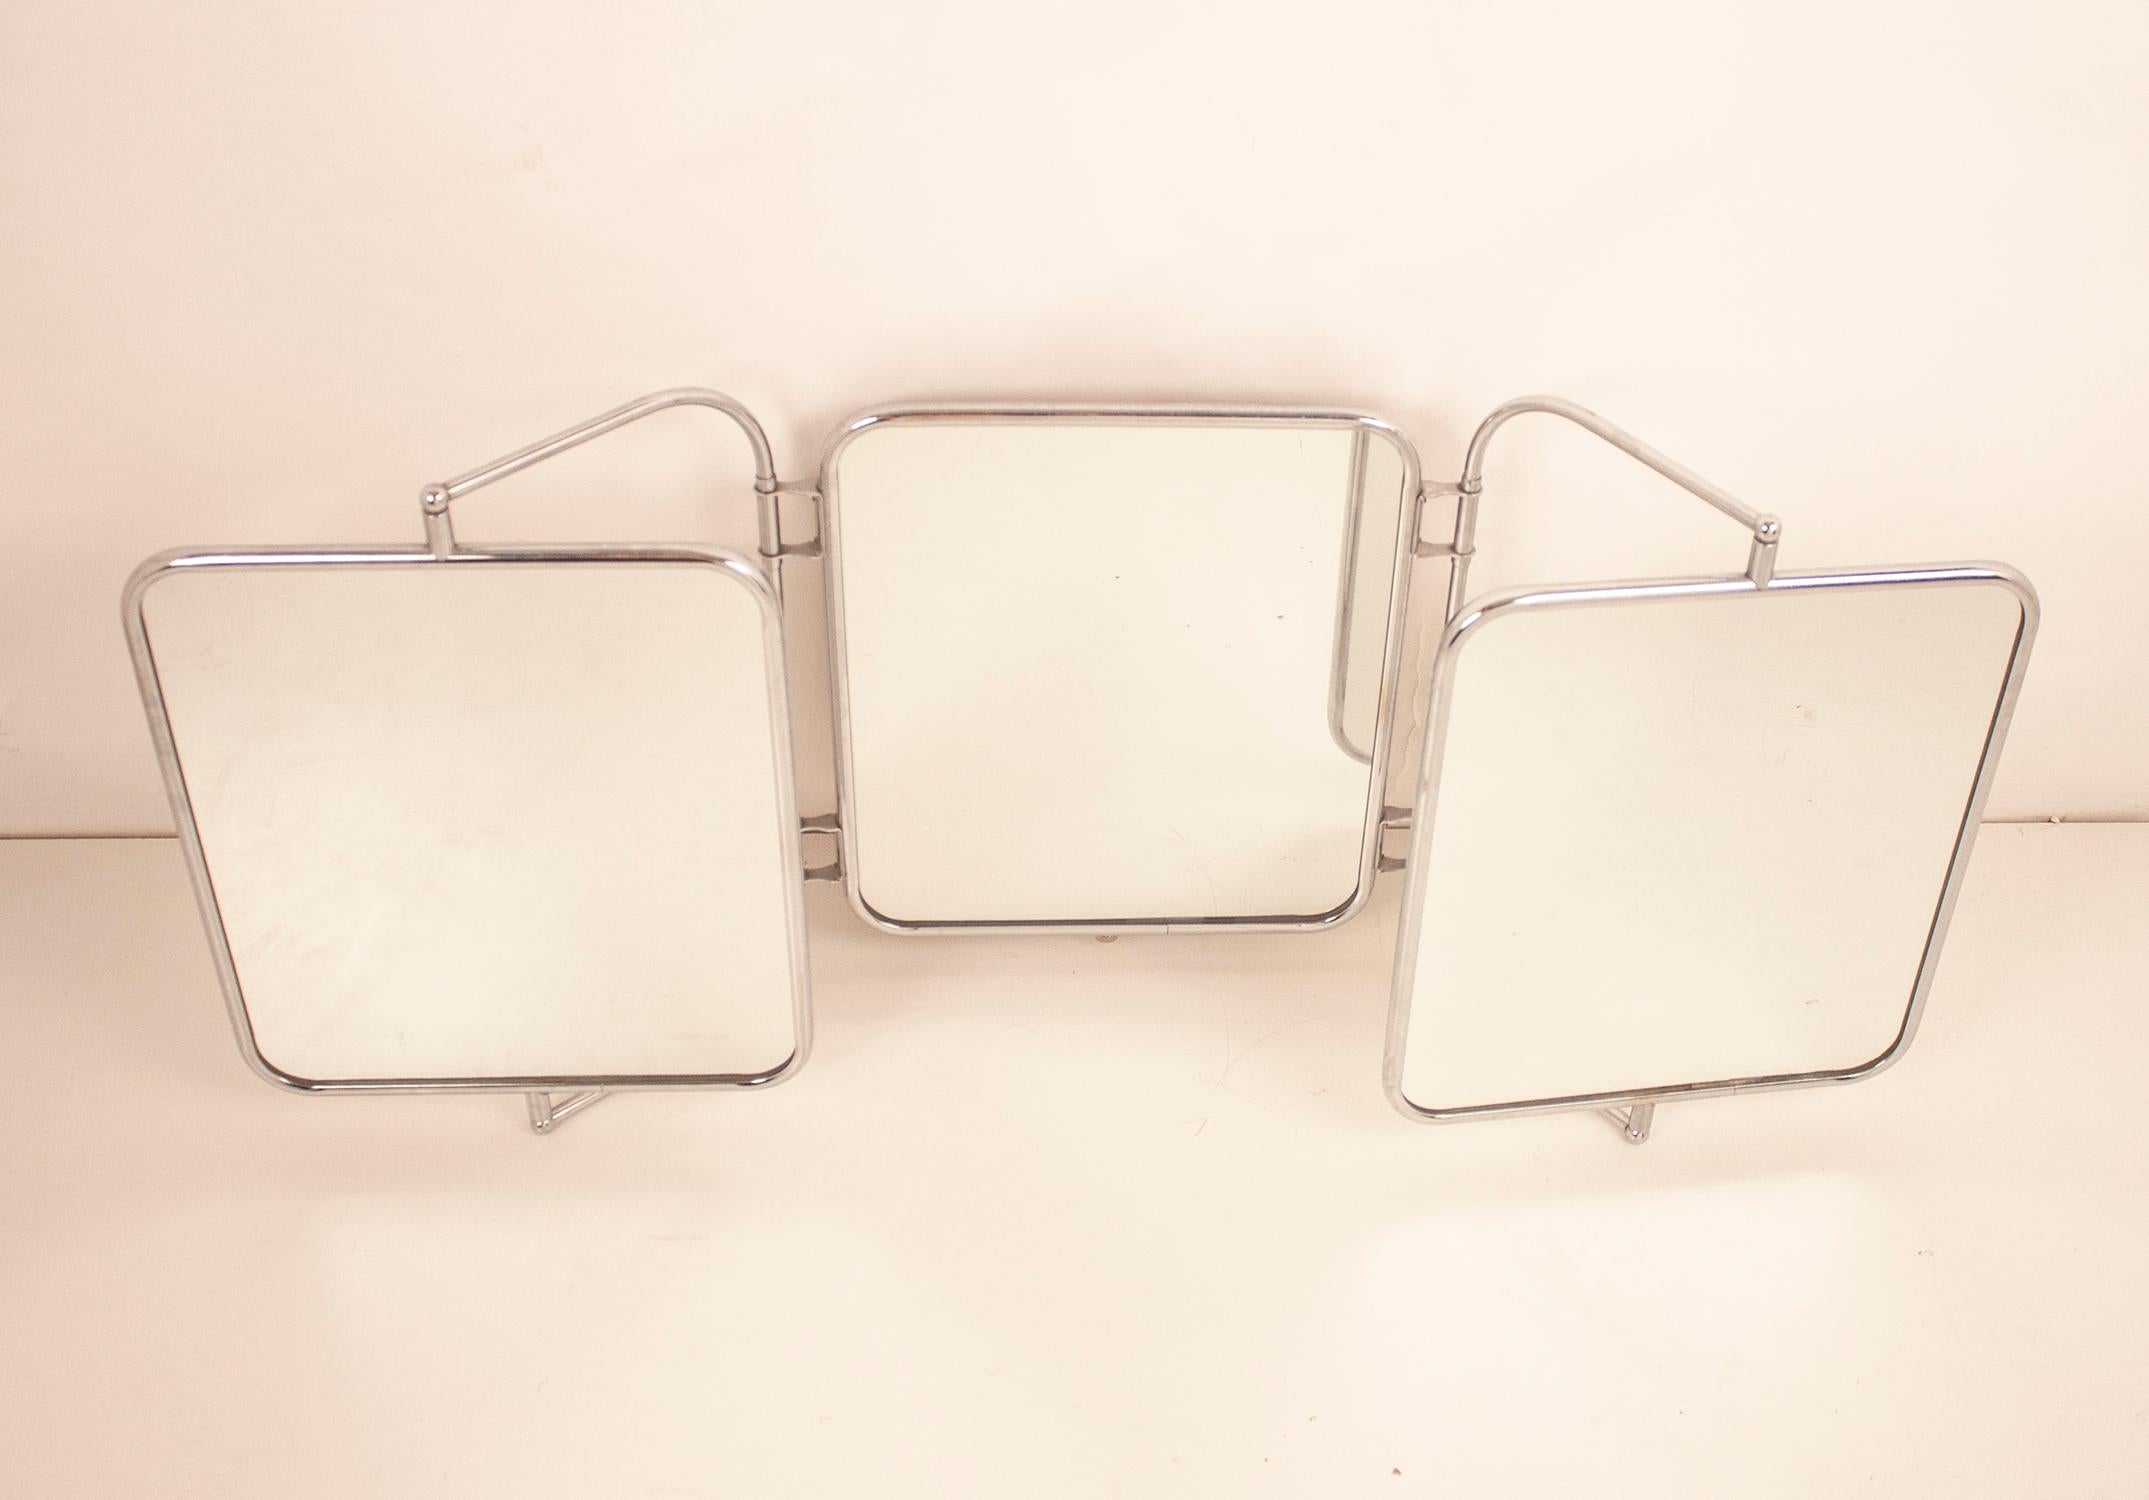 Midcentury Triptych Wall Mirror, White Bakelite and Chrome, Spain, 1940s 1